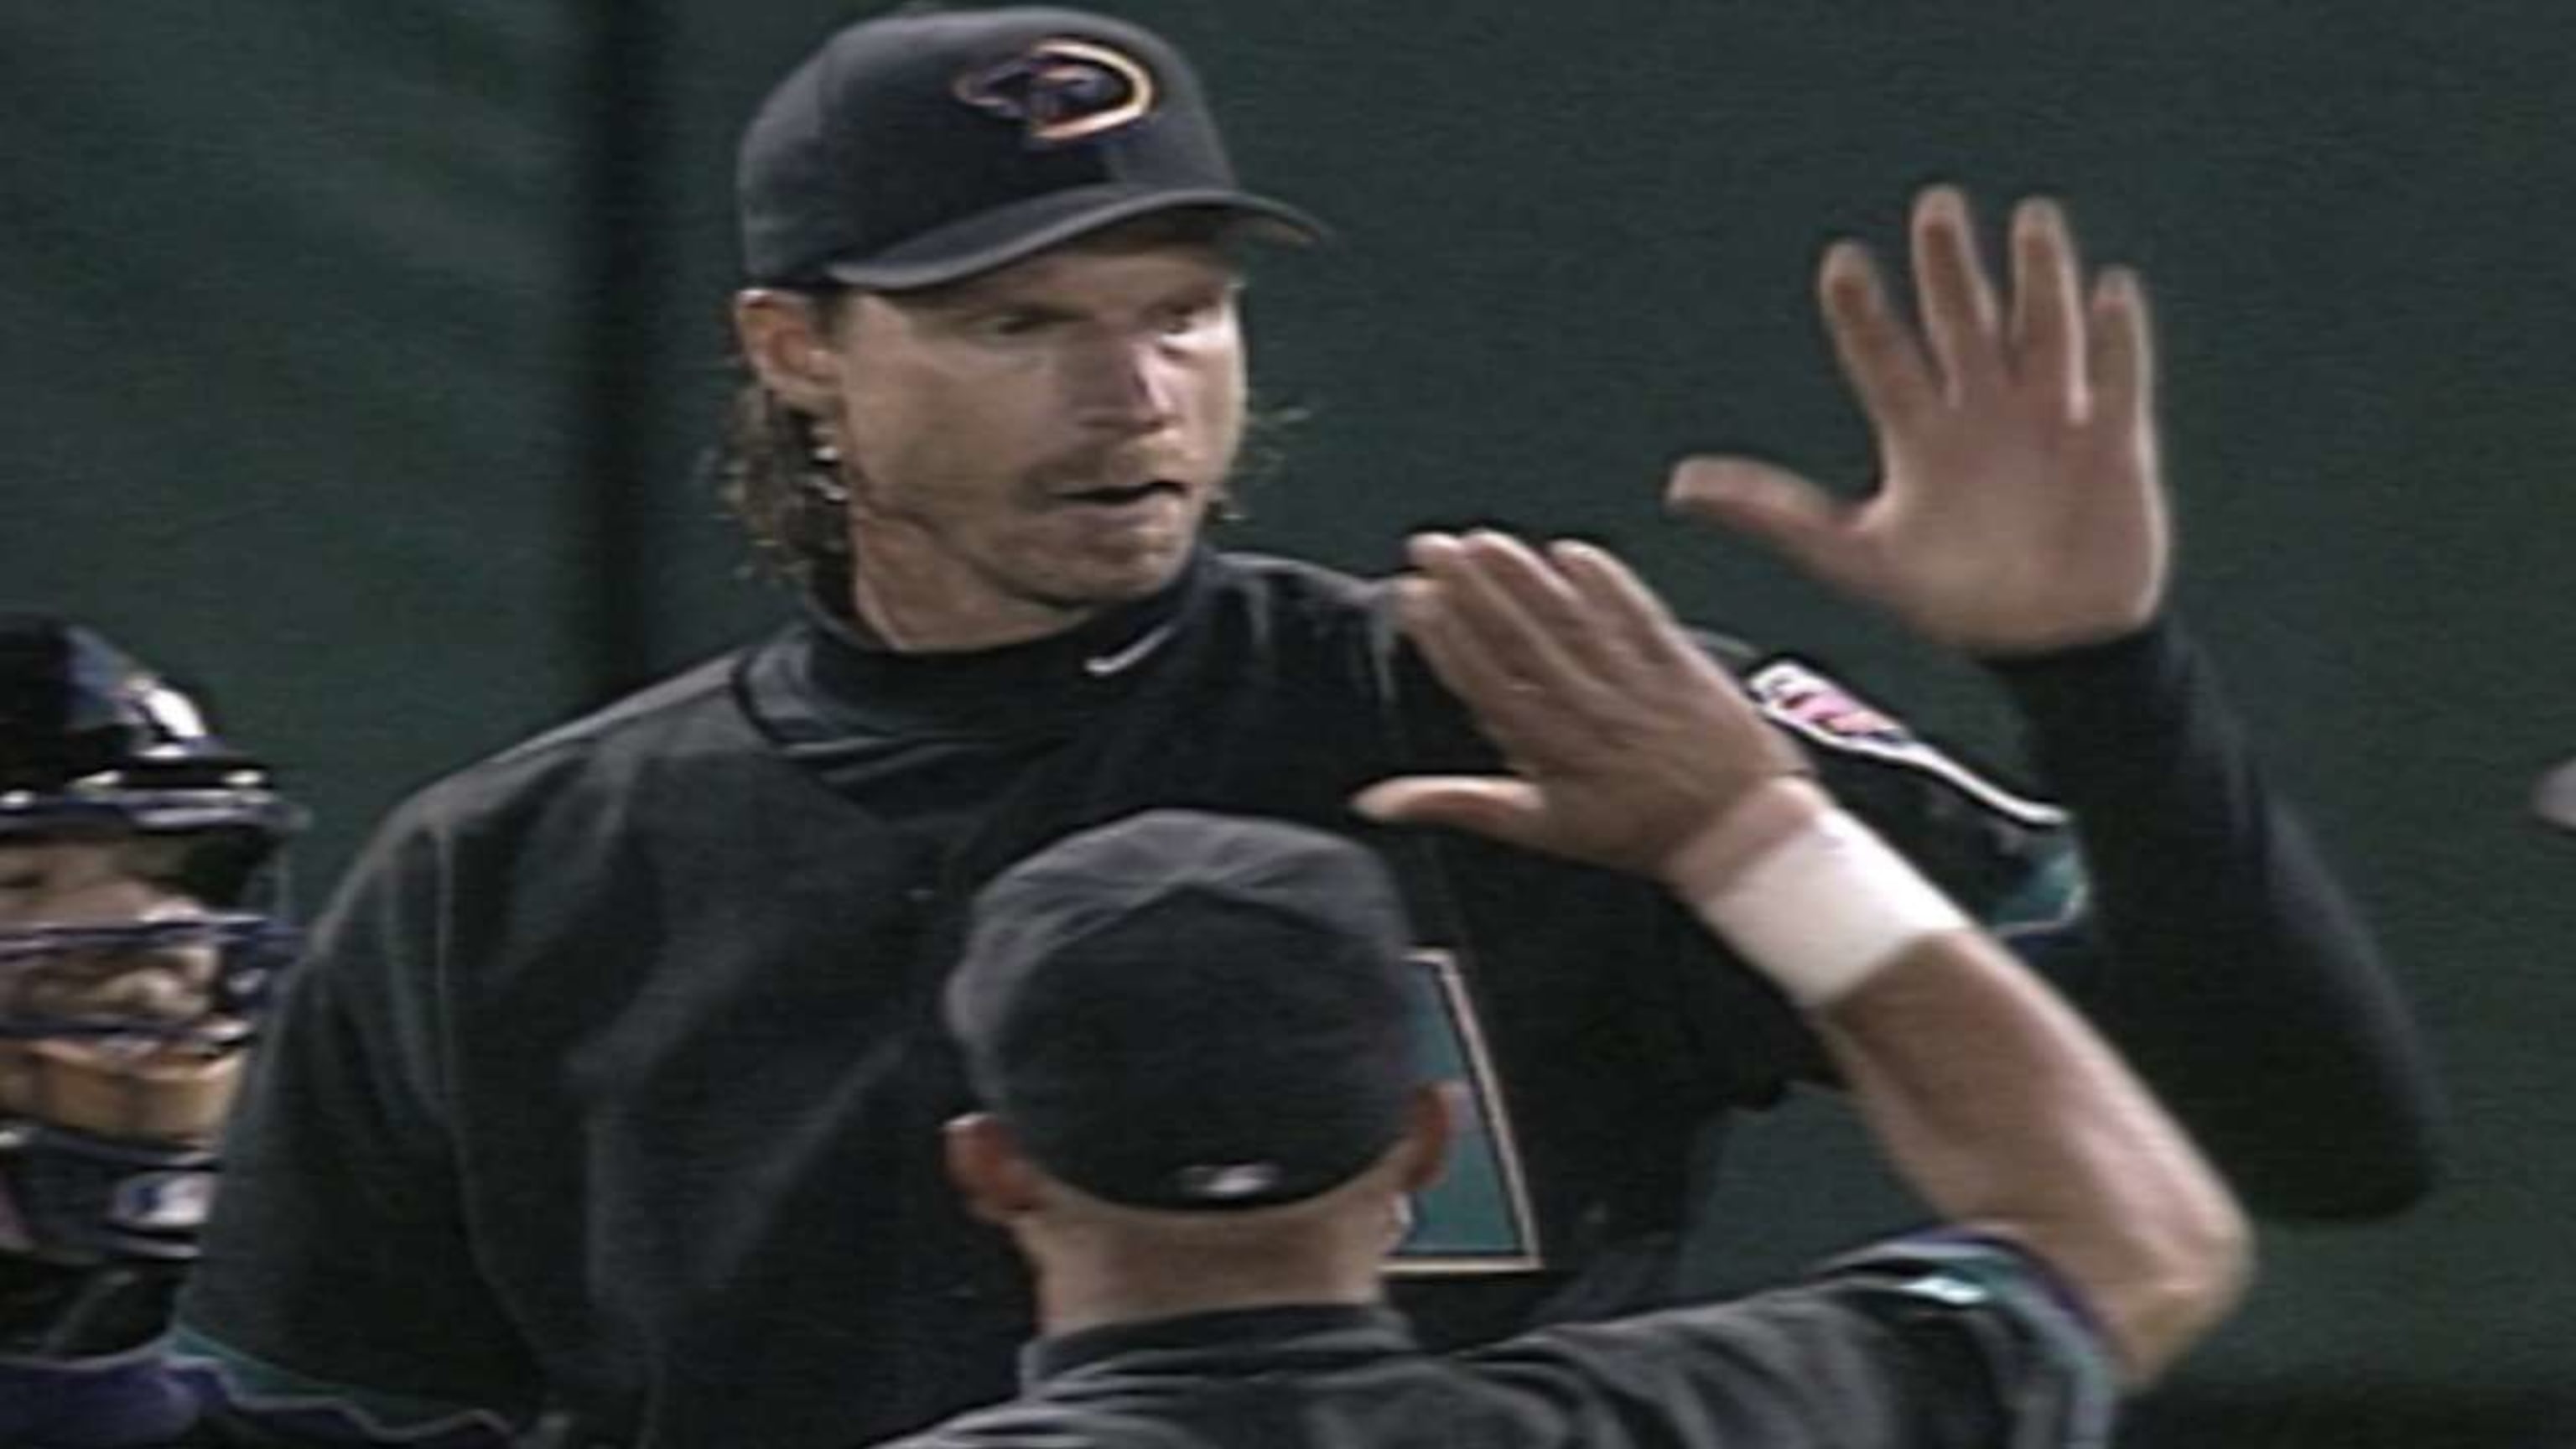 remember when the Dbacks traded randy johnson to the giants right